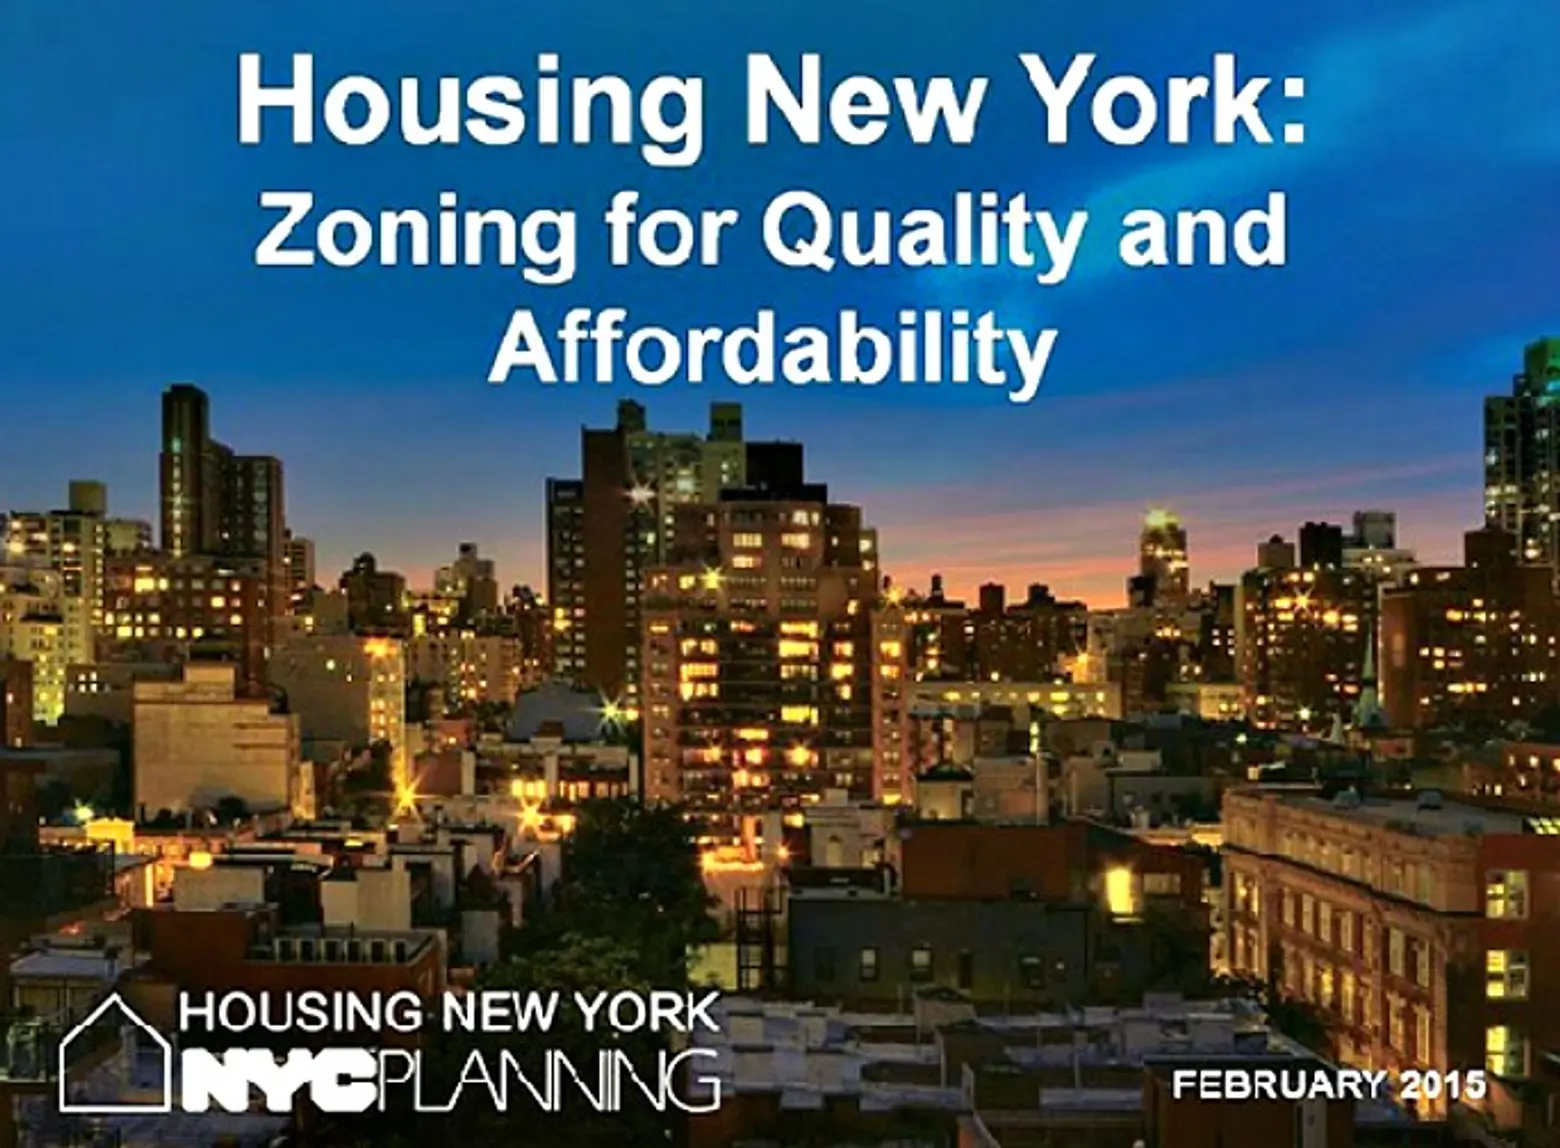 City Proposes New Zoning Plan to Increase Affordability, Current Height Limits to Be Lifted